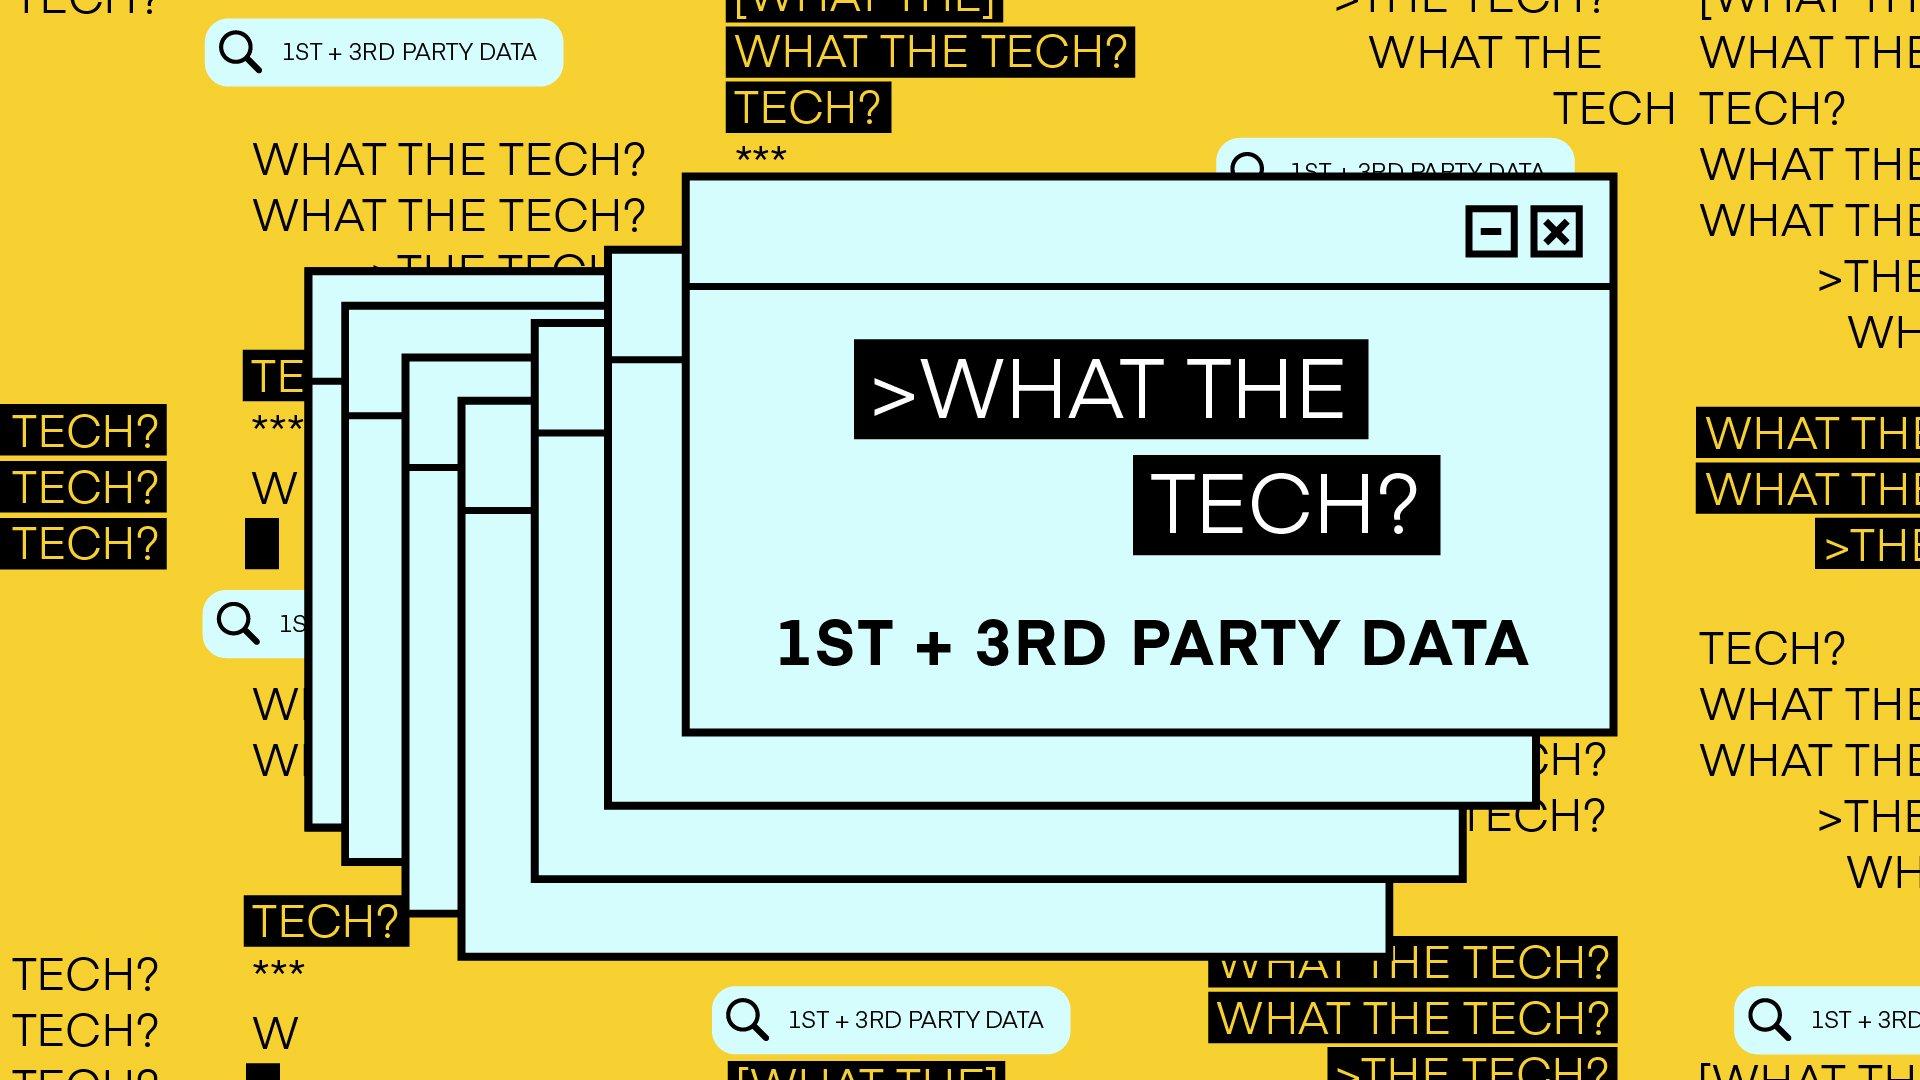 What the Tech is first- and third-party data?